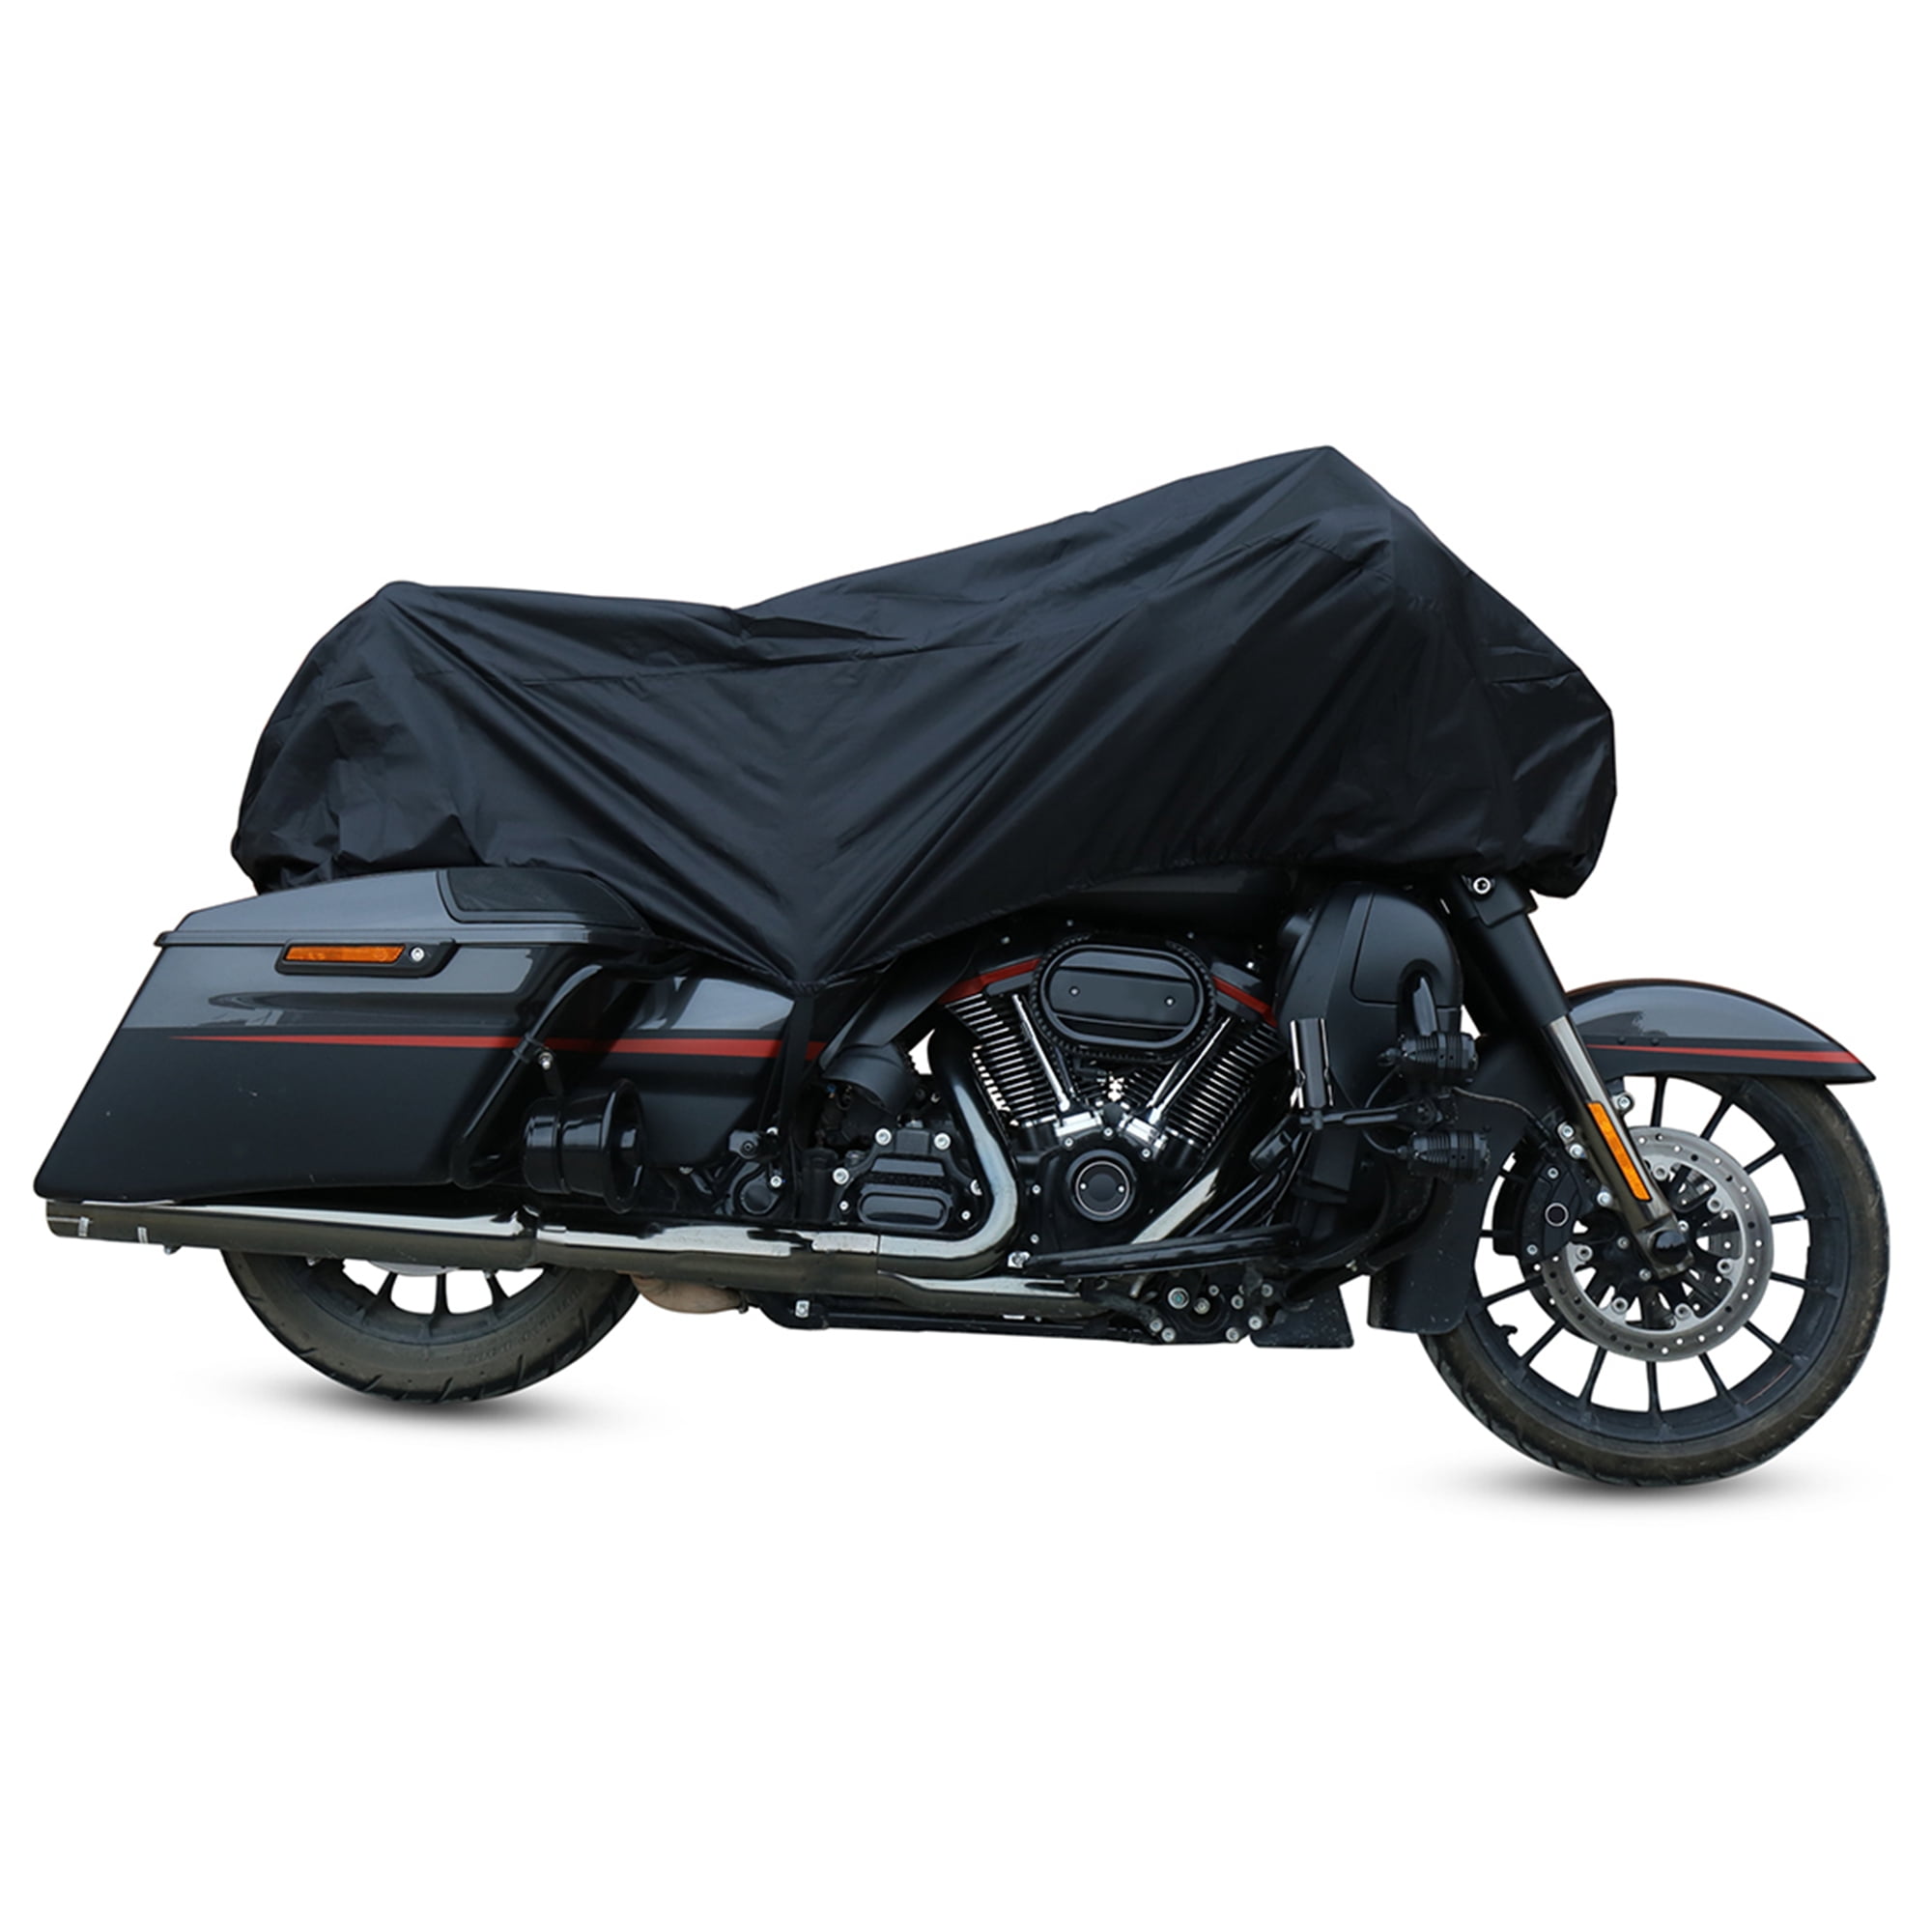 Motorcycle Cover with Air Vents Yamaha XVS1300 XVS 1300 Bike new XXL 